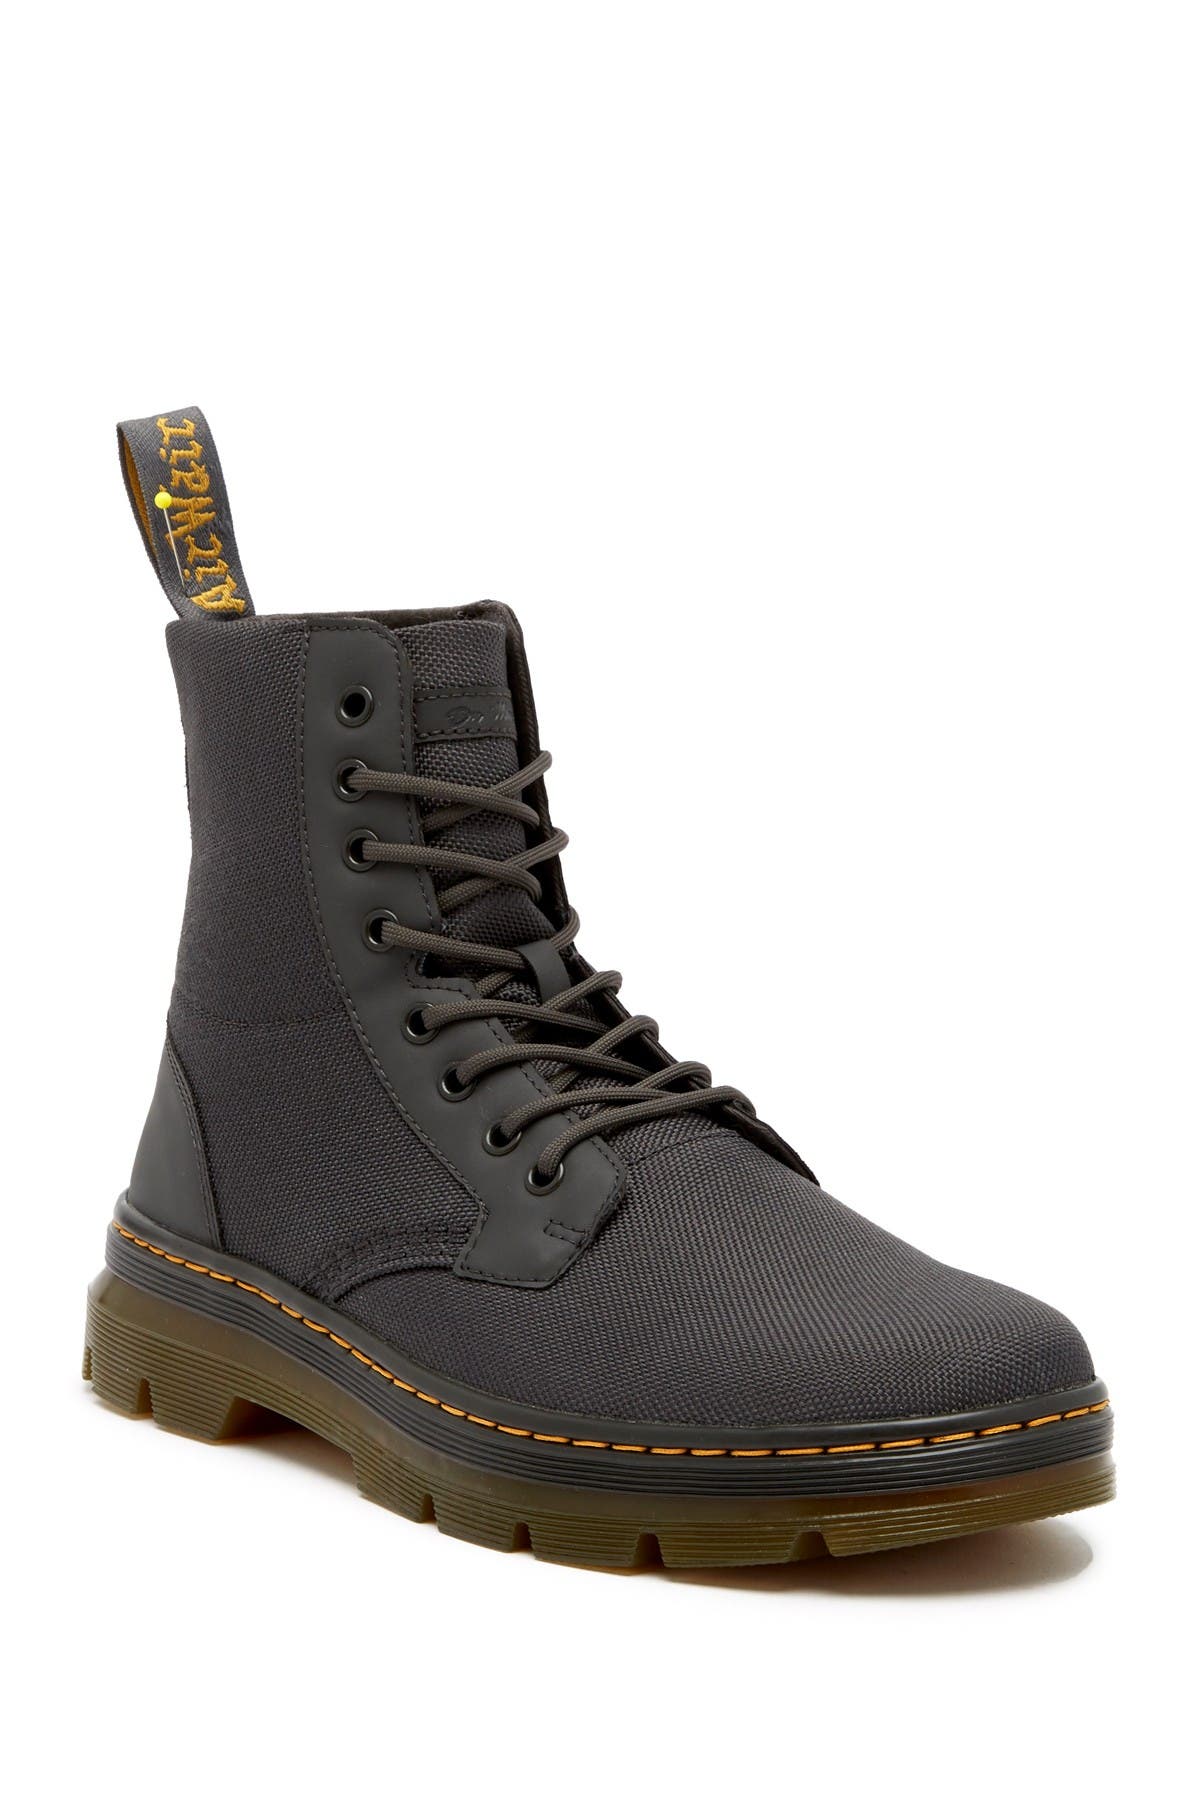 Dr. Martens | Combs Lace-Up Boot | Nordstrom Rack